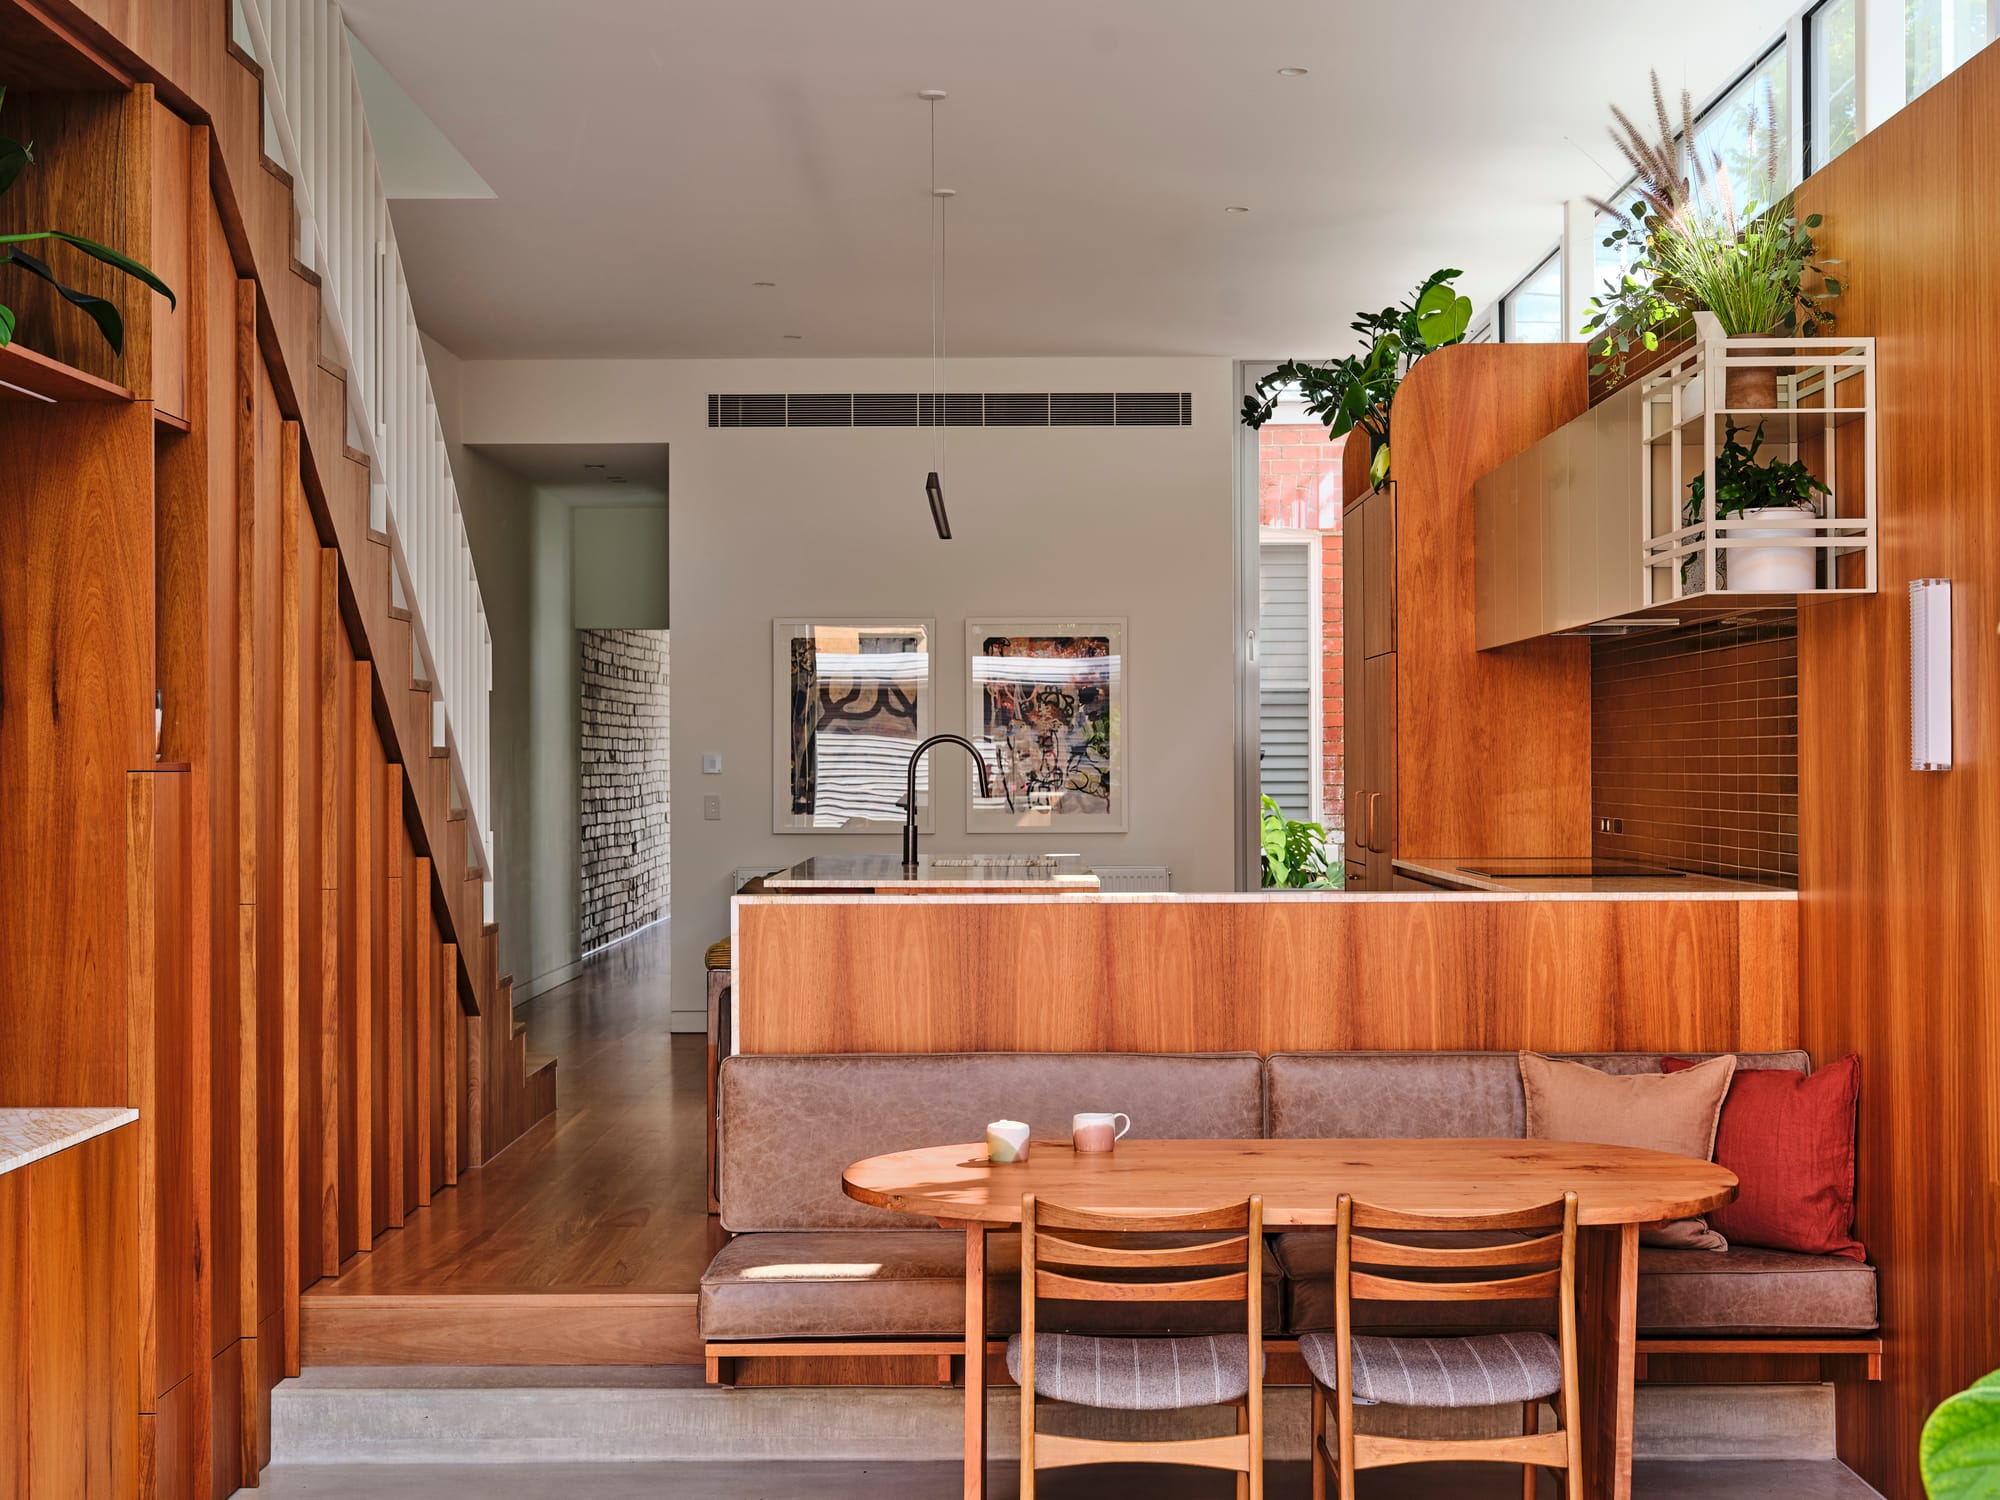 House Northroy by True Story. Photography by Dean Bradley. Sunken breakfast nook with brown leather bench seat and timber table. Timber kitchen and stairs on level above.